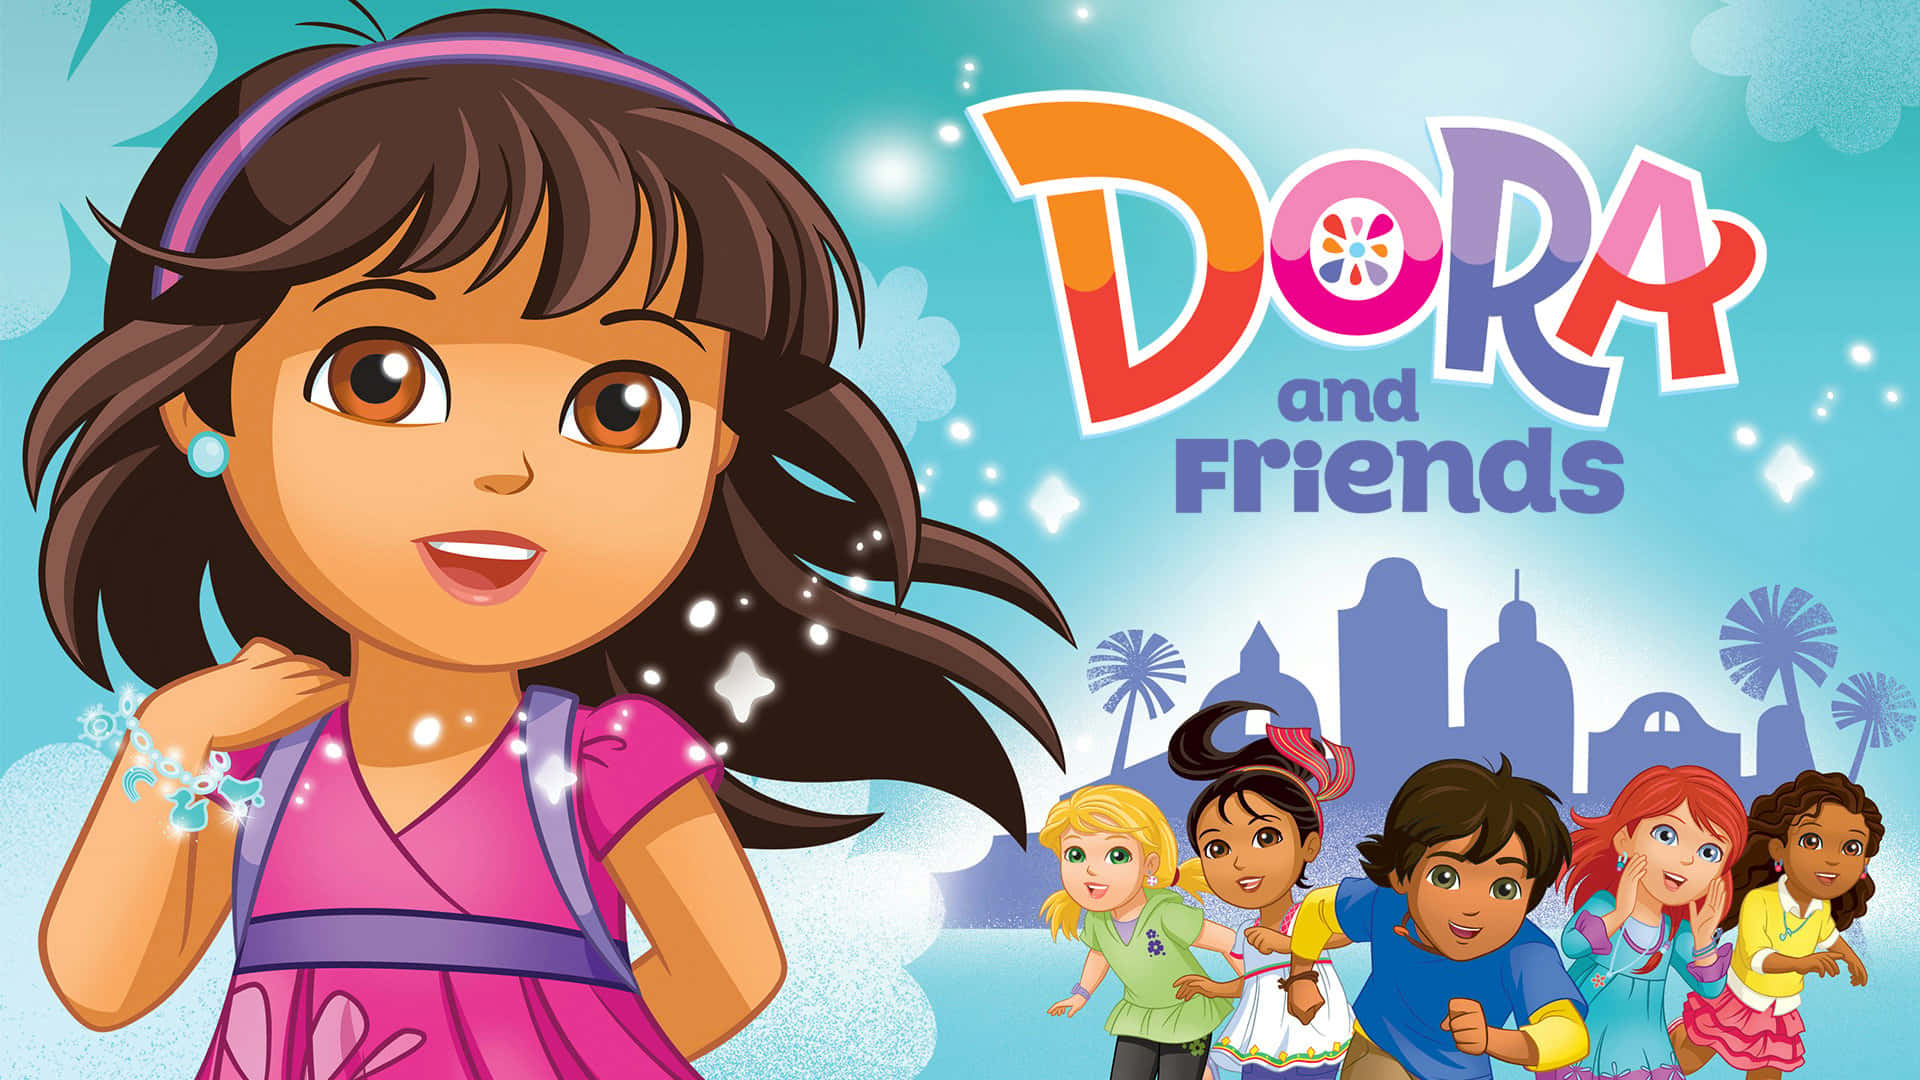 Let's Explore the World with Dora!